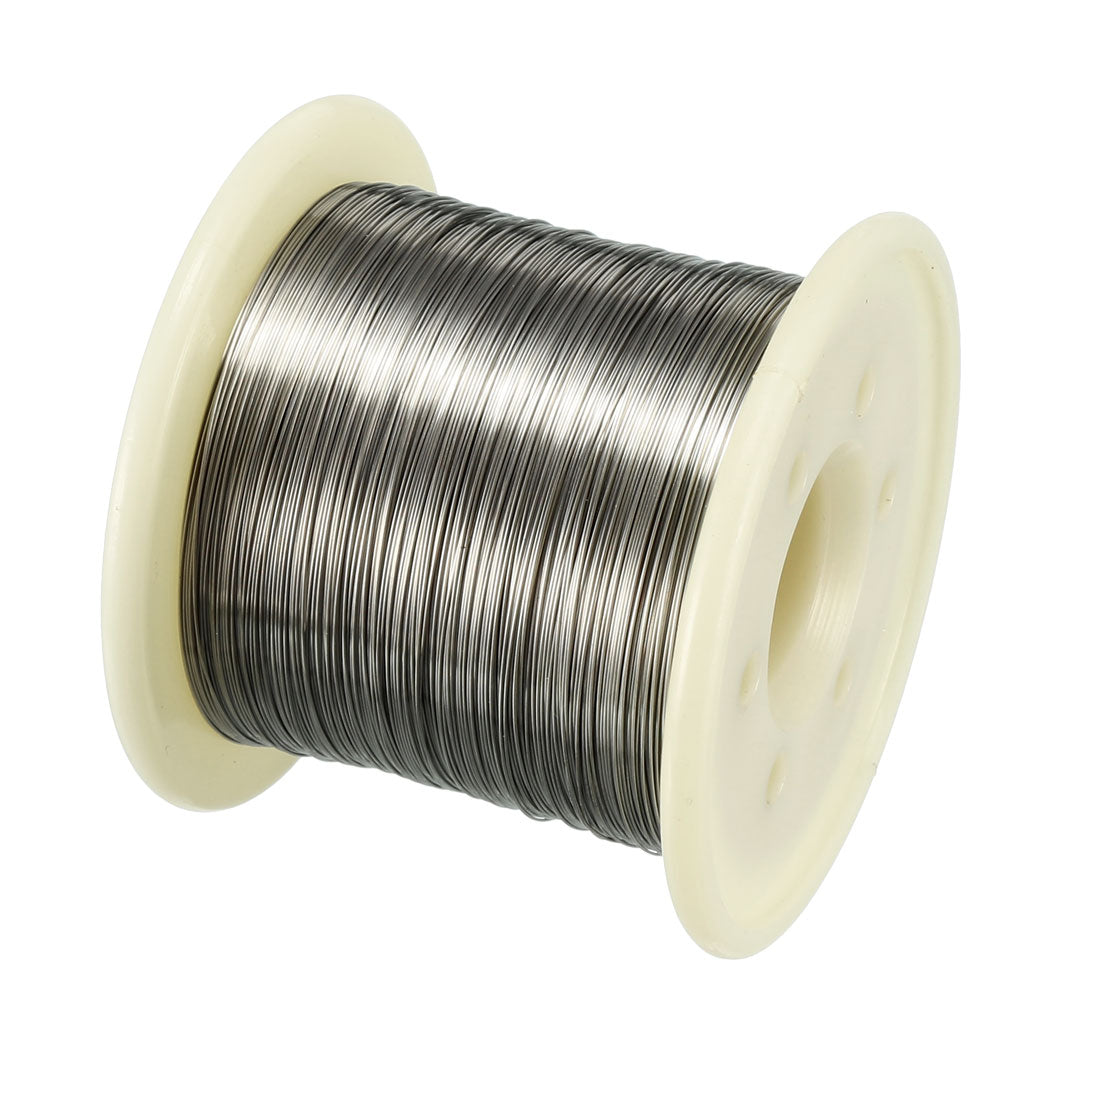 uxcell Uxcell 0.25mm 30AWG Heating Resistor Wire Nichrome Resistance Wires for Heating Elements 328ft